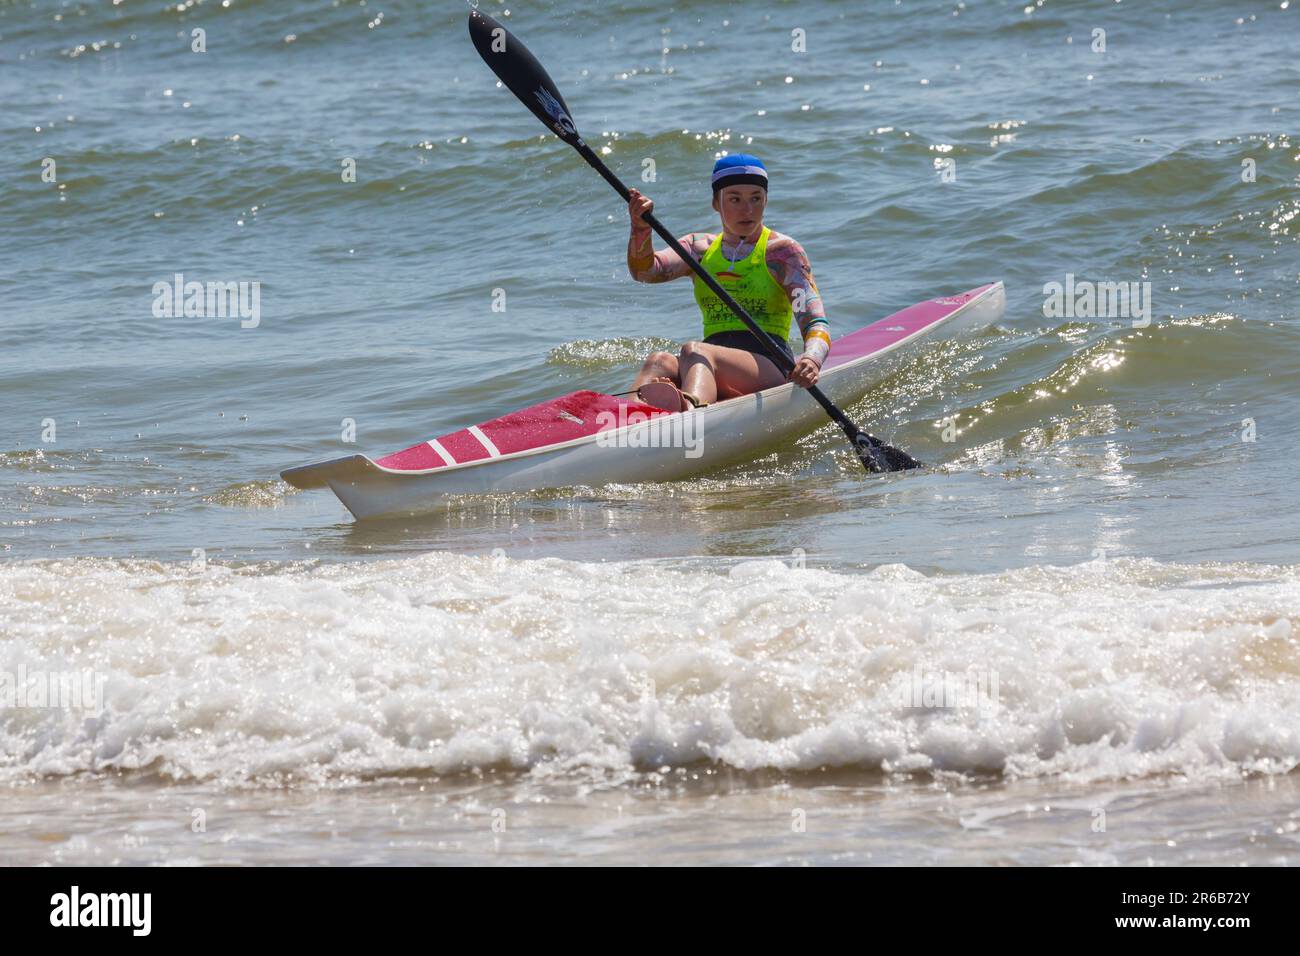 Young woman in a surf ski surfski, the Surf Life Saving GB GBR Beach Trial Weekend at Branksome Chine, Poole, Dorset, England UK in June Stock Photo